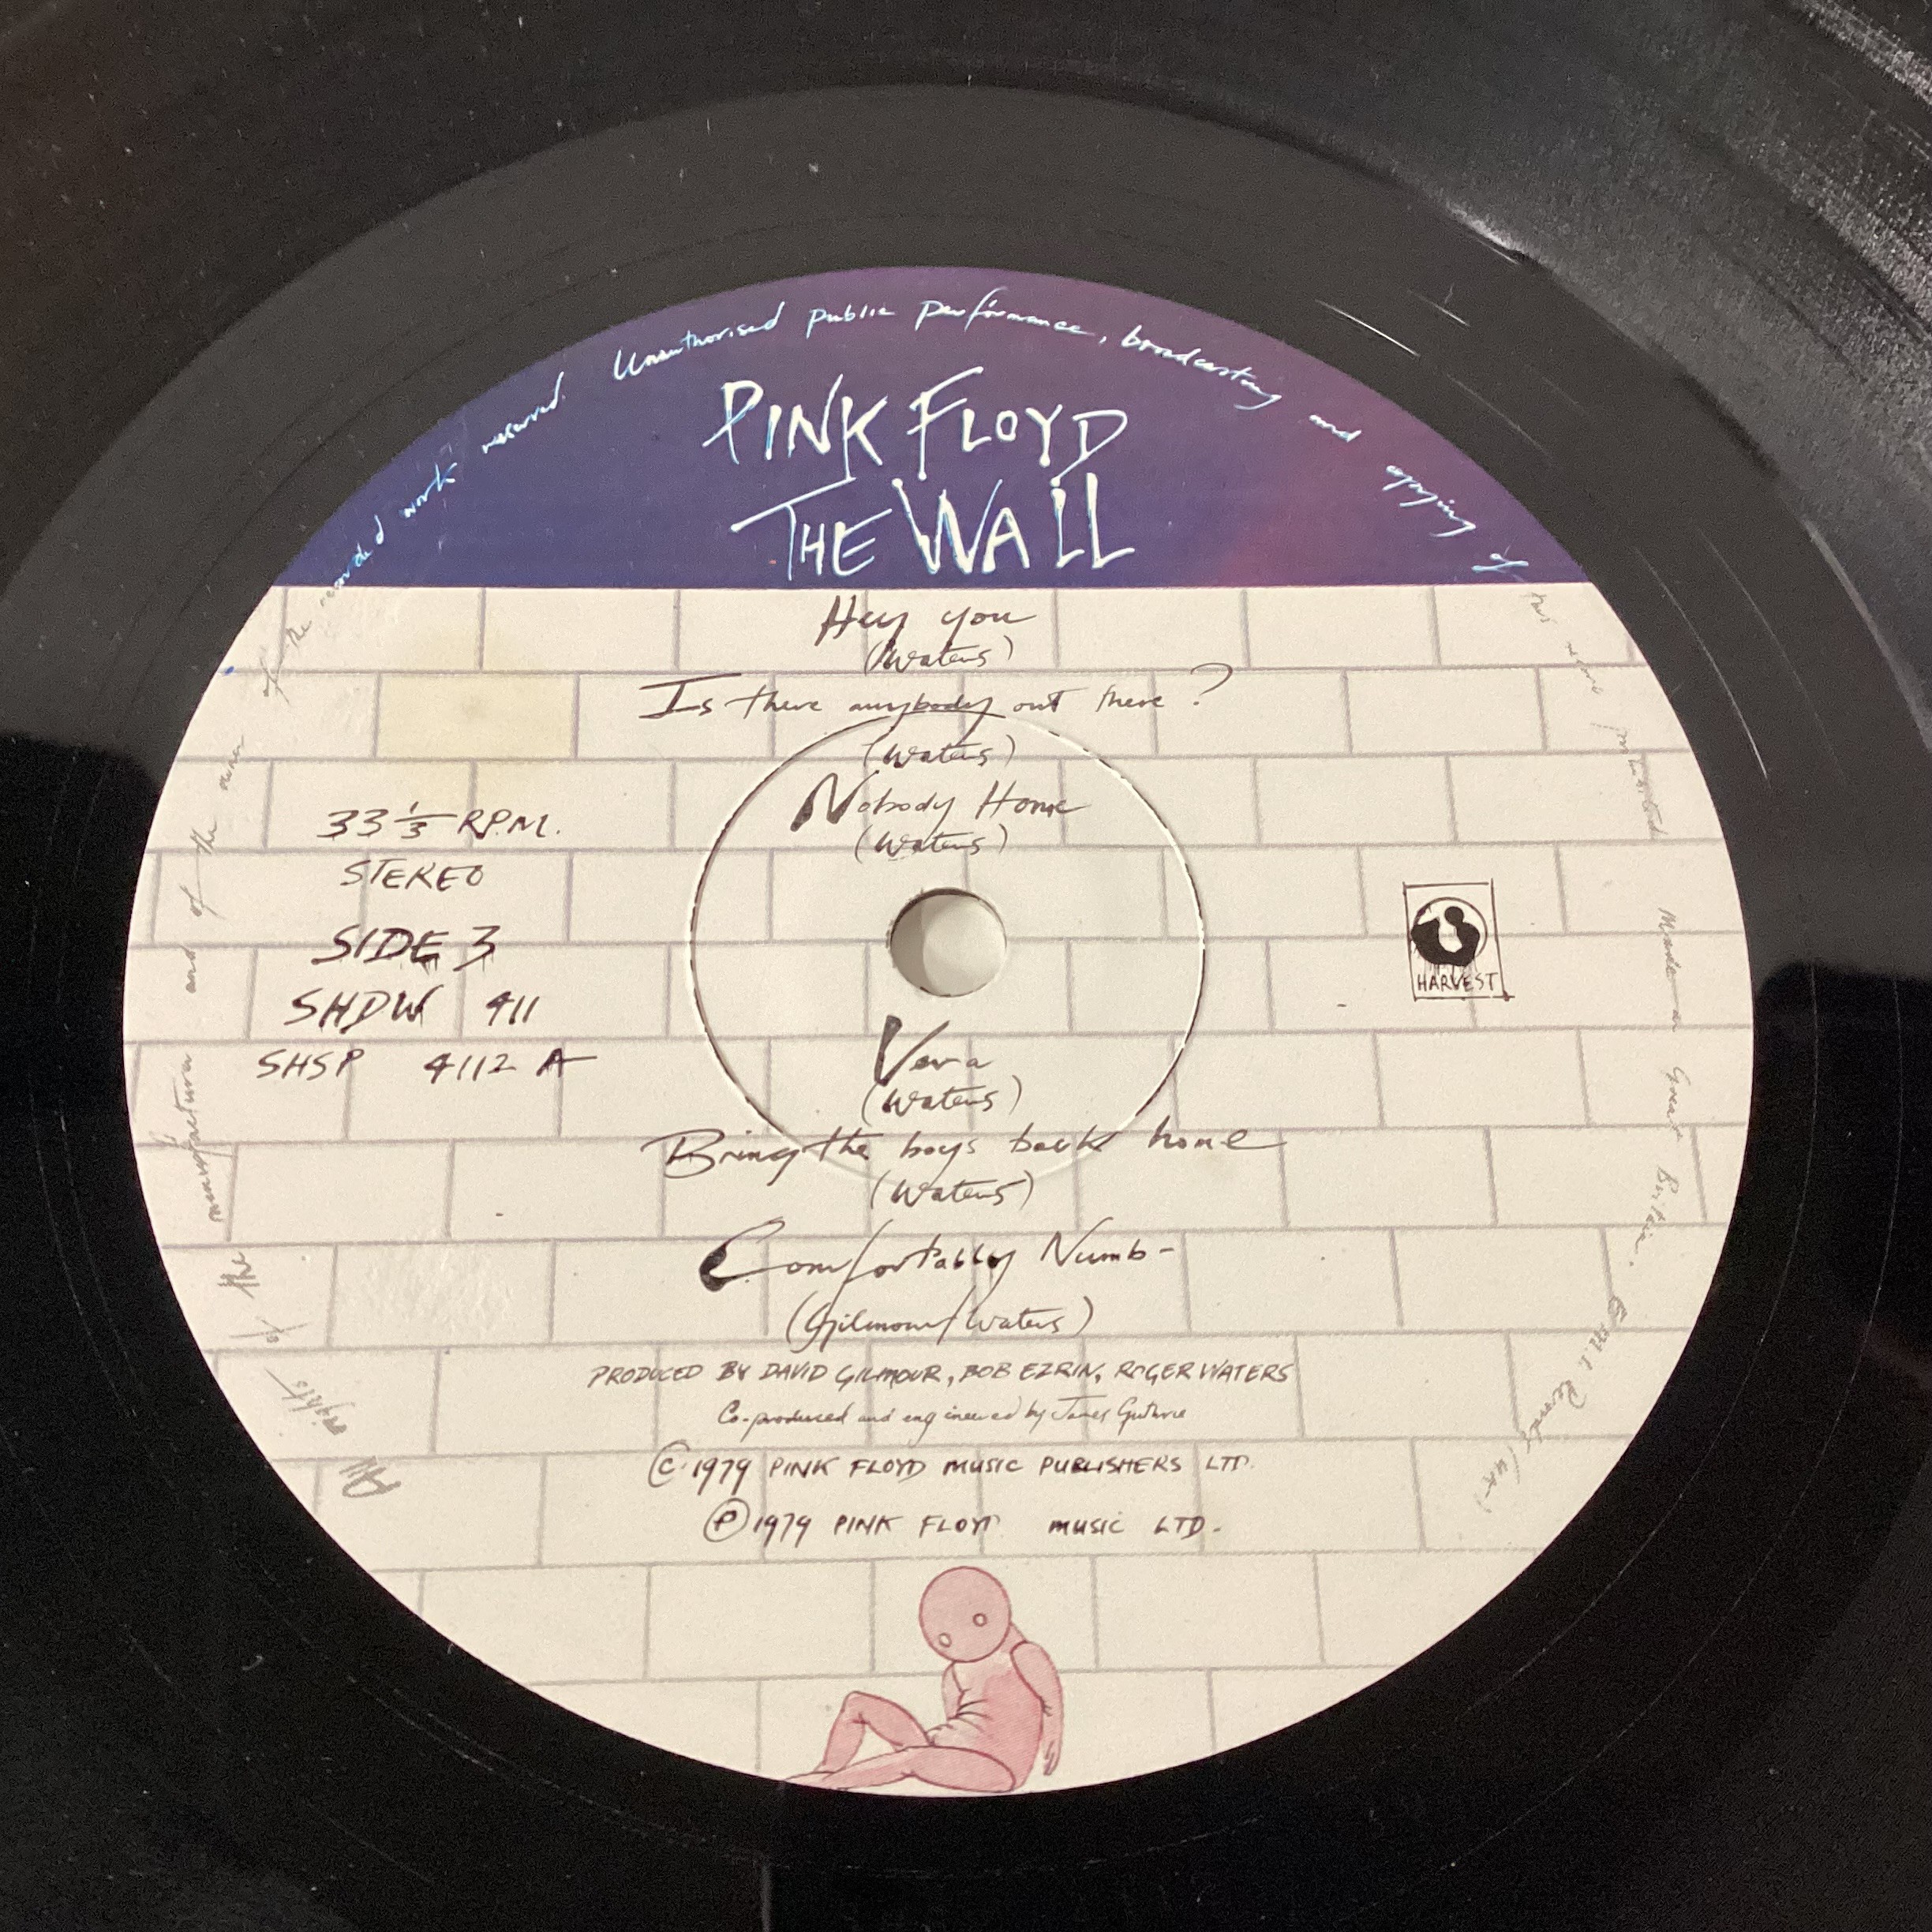 PINK FLOYD VINYL LP RECORDS X 2. Copies here include ‘The Wall’ double album on Harvest SHDW 411 - Image 5 of 9